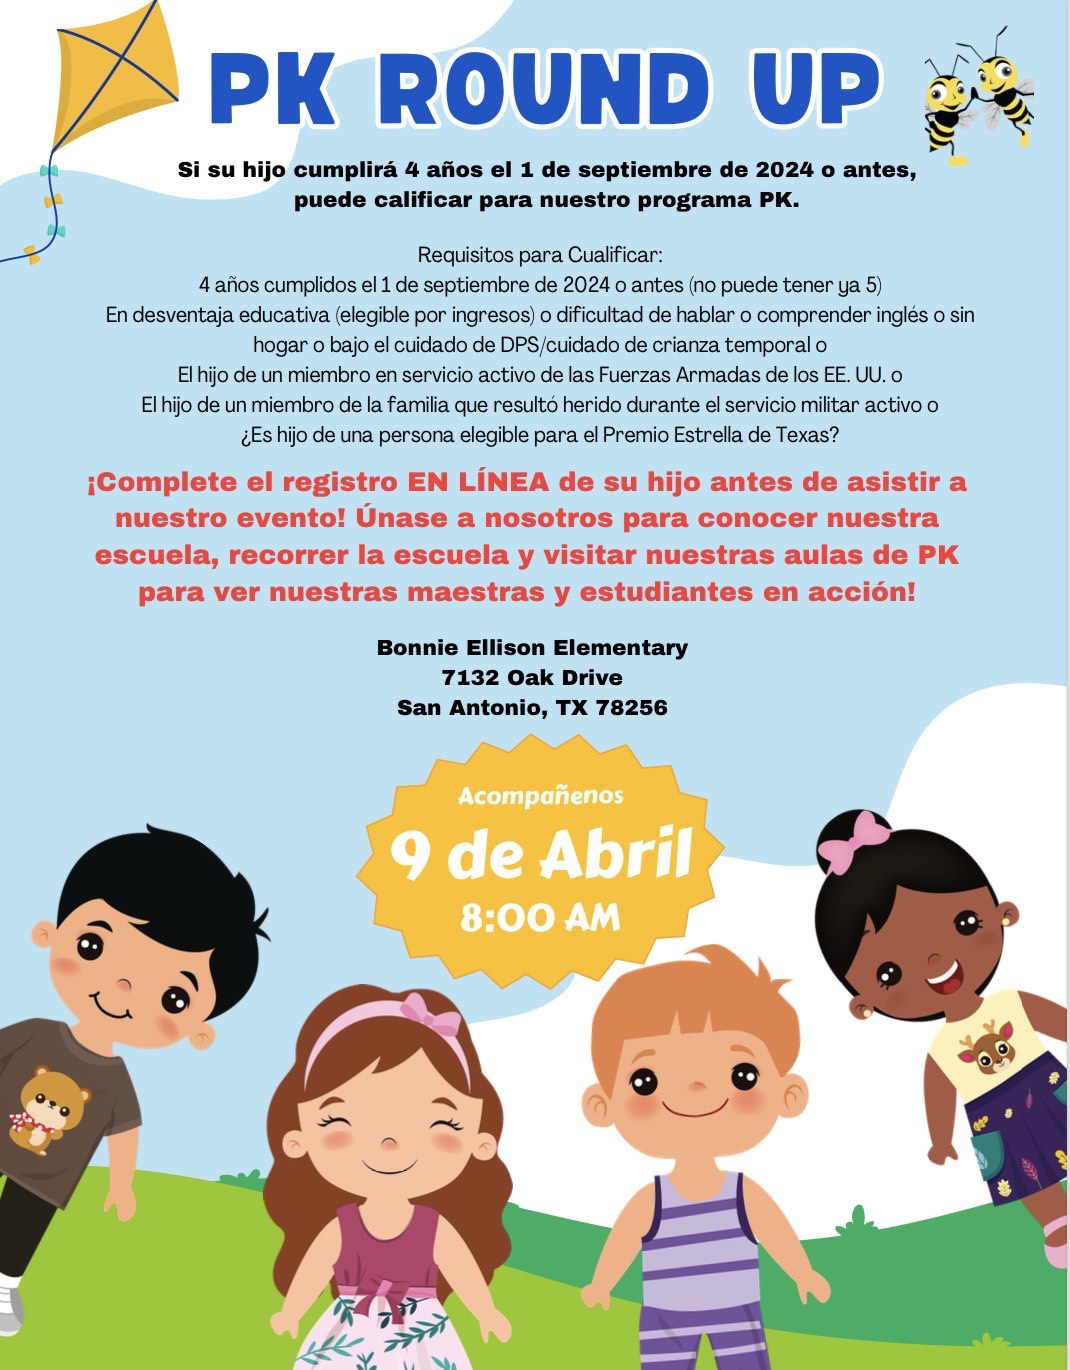 Spanish version of Flyer with copied information about pre K roundup as described in text above